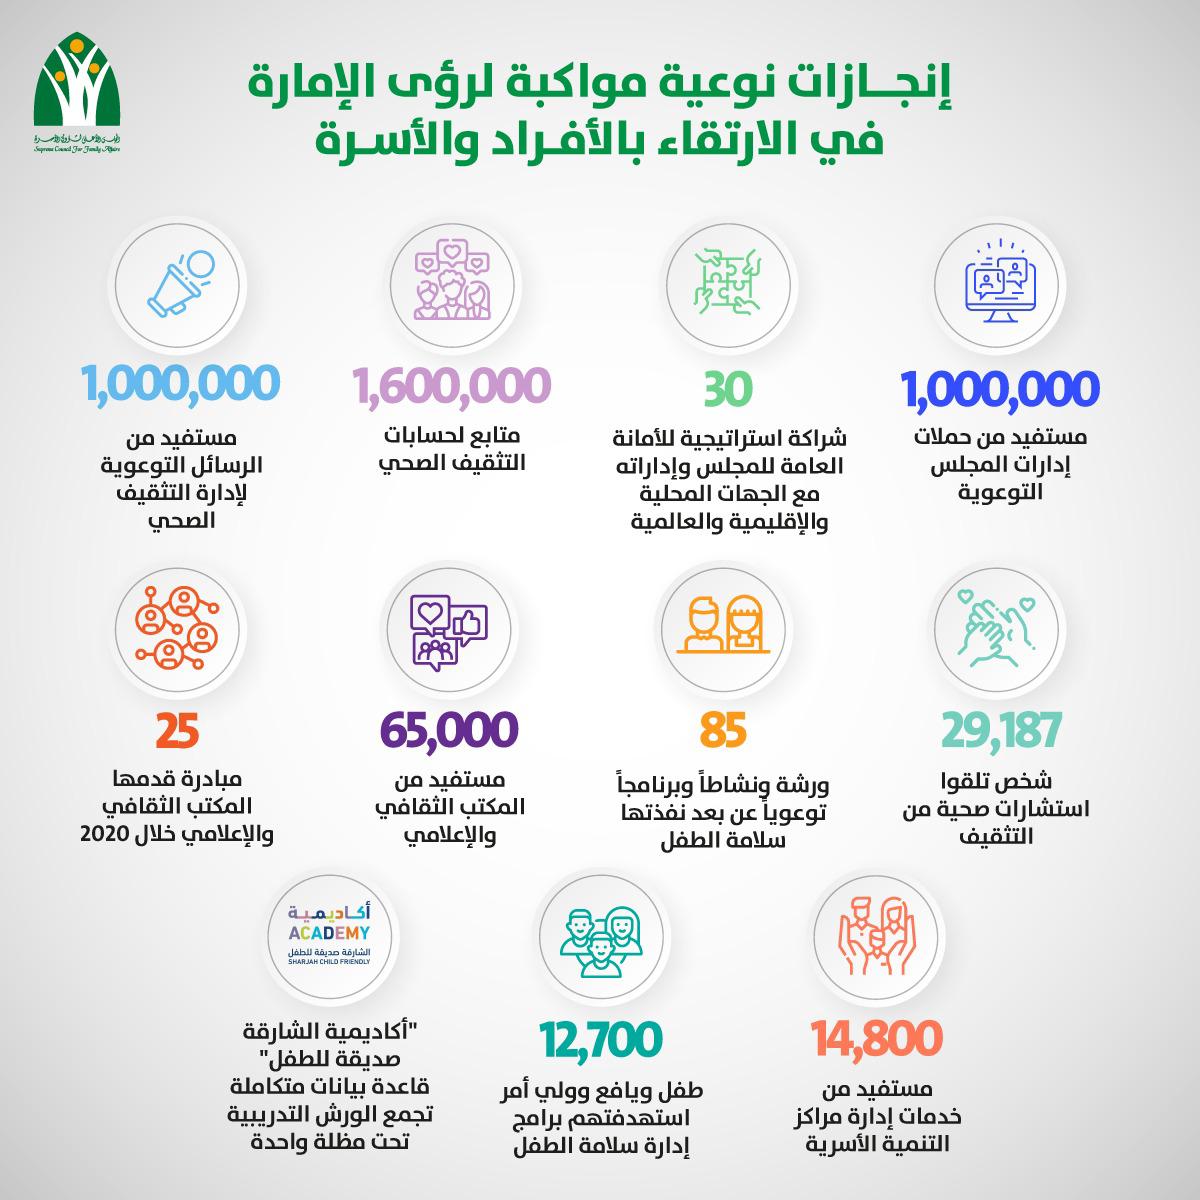  SCFA Highlights in 2020: Outstanding successes in achieving Sharjah’s vision to promote family welfare